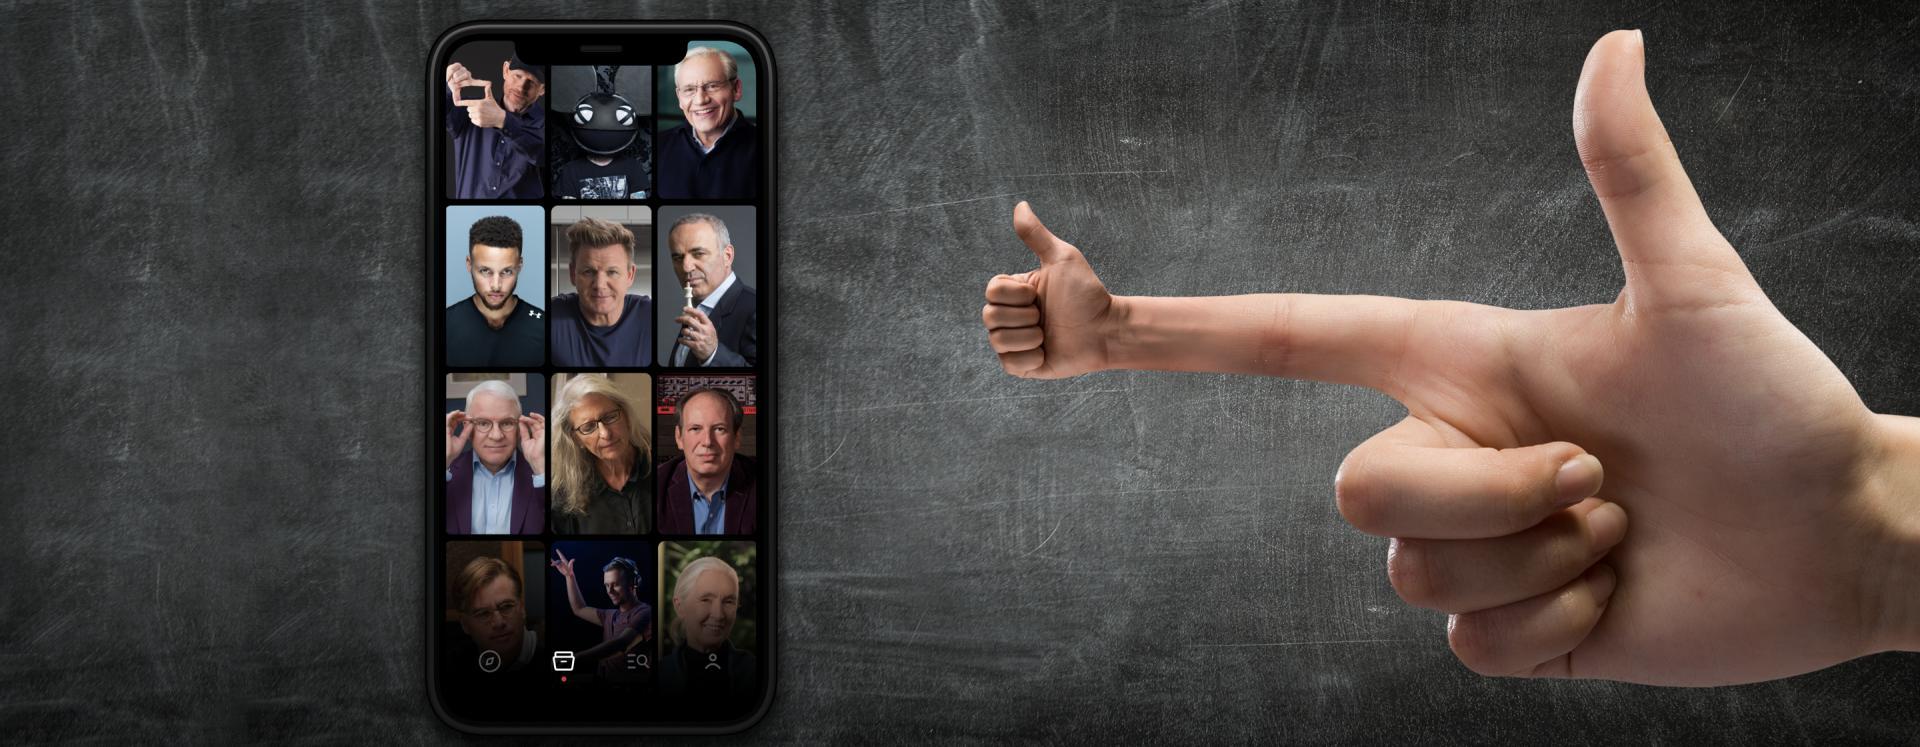 Hand Making Thumbs Ups To Mobile Phone With Famous People Photos On Phone Screen